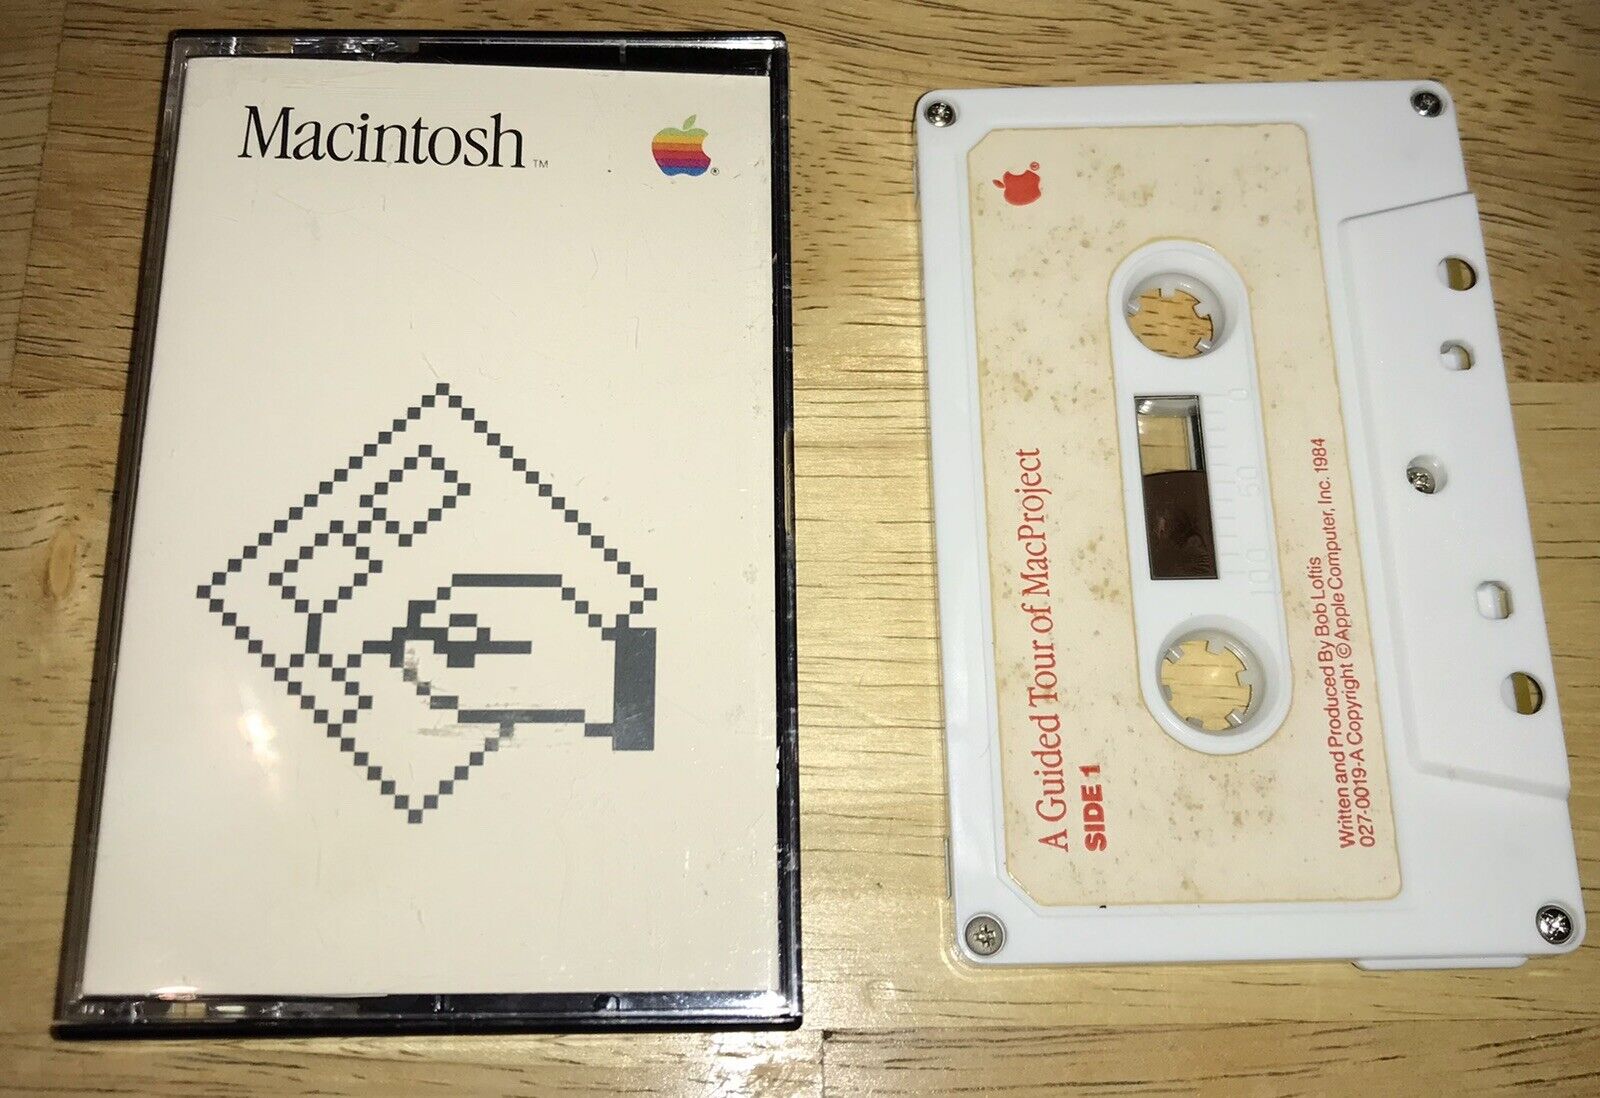 1984 A Guided Tour of MacProject Audio Cassette in Case M0001 Mac 128K RARE